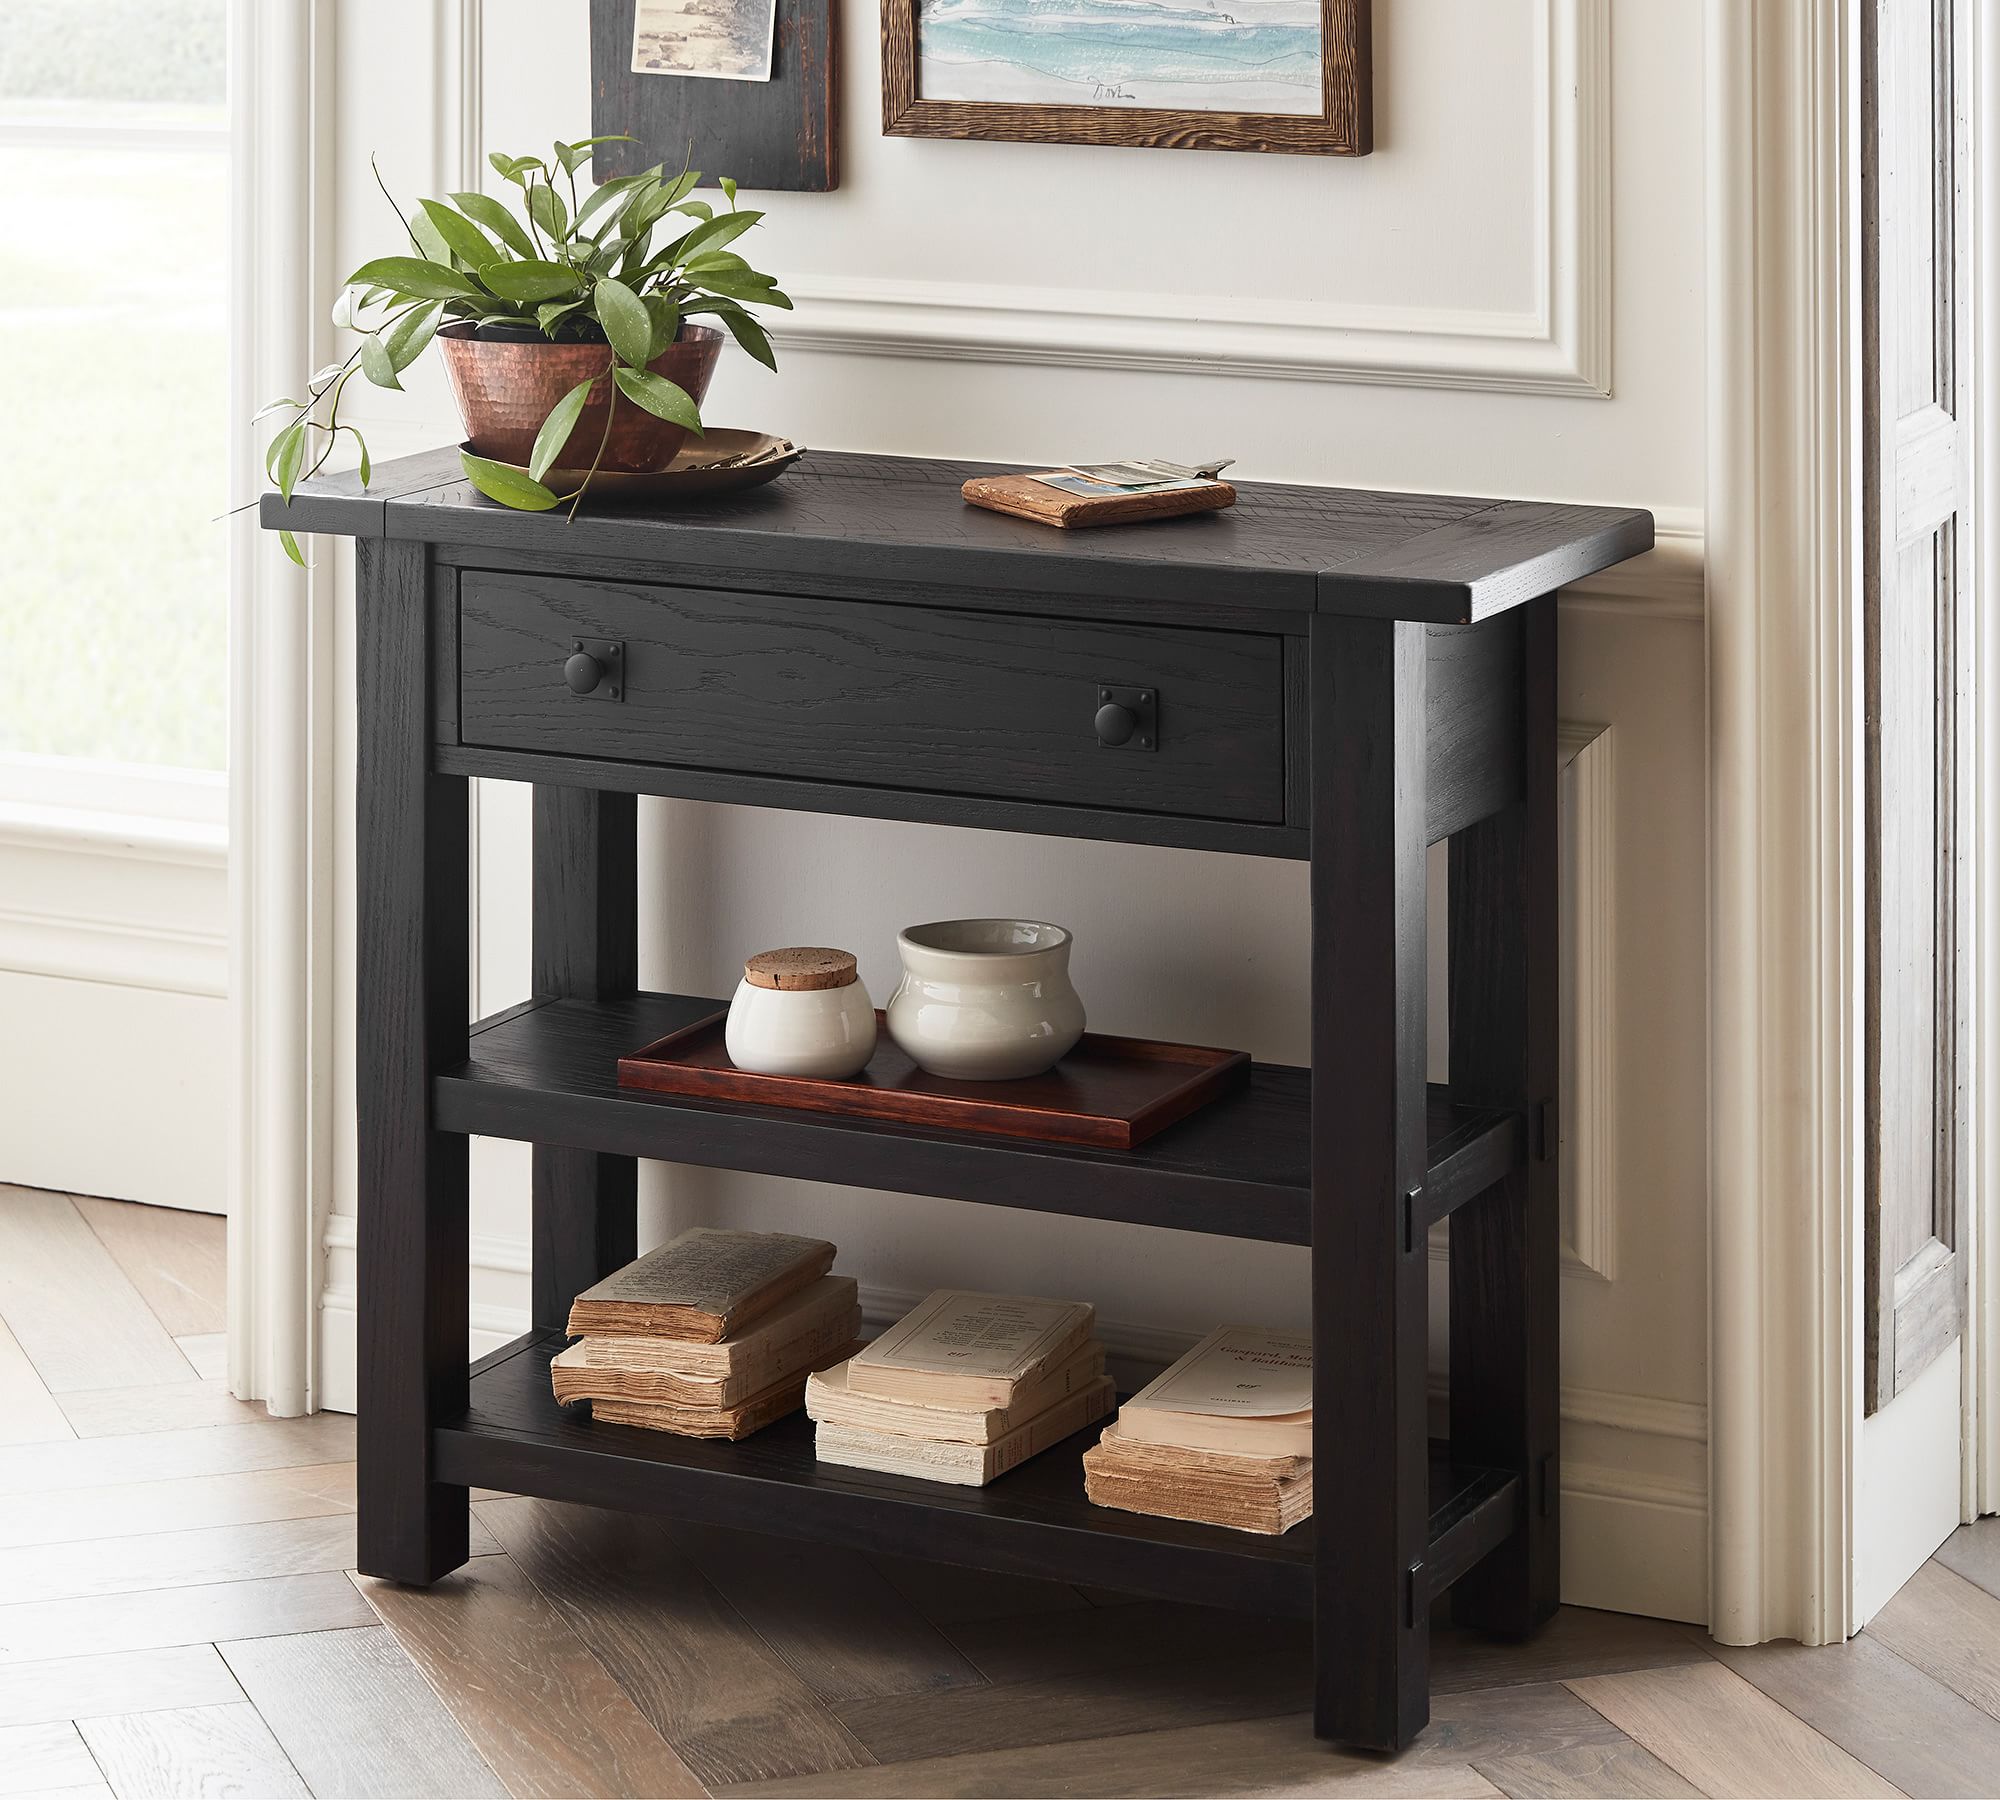 Benchwright Small Space Console Table (36")